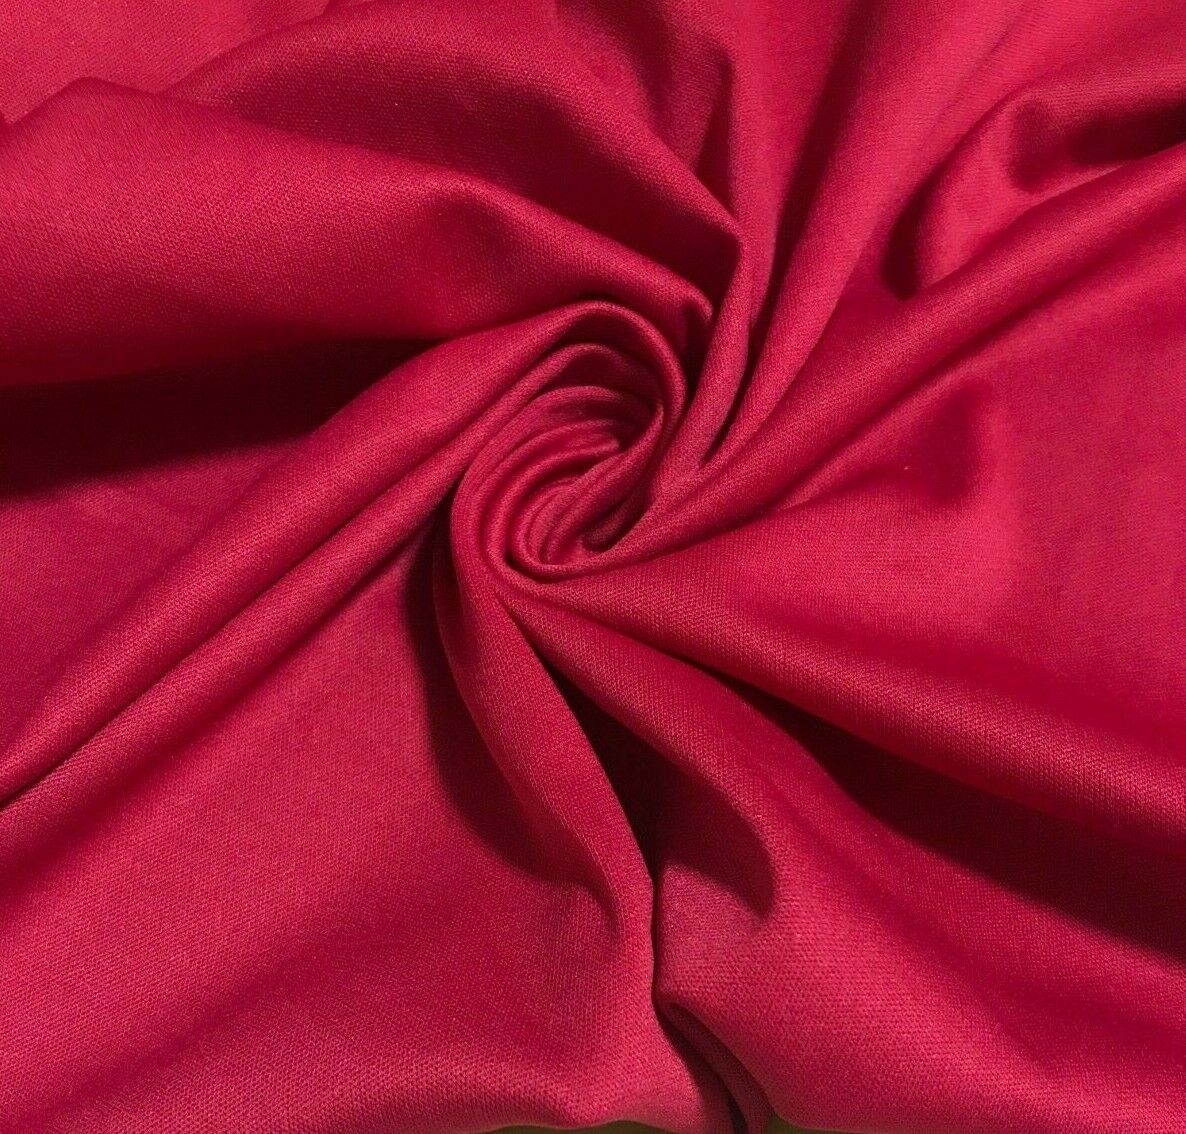 FUCHSIA AND ROSE PINK POLYESTER JERSEY FABRIC - SOLD BY THE METRE